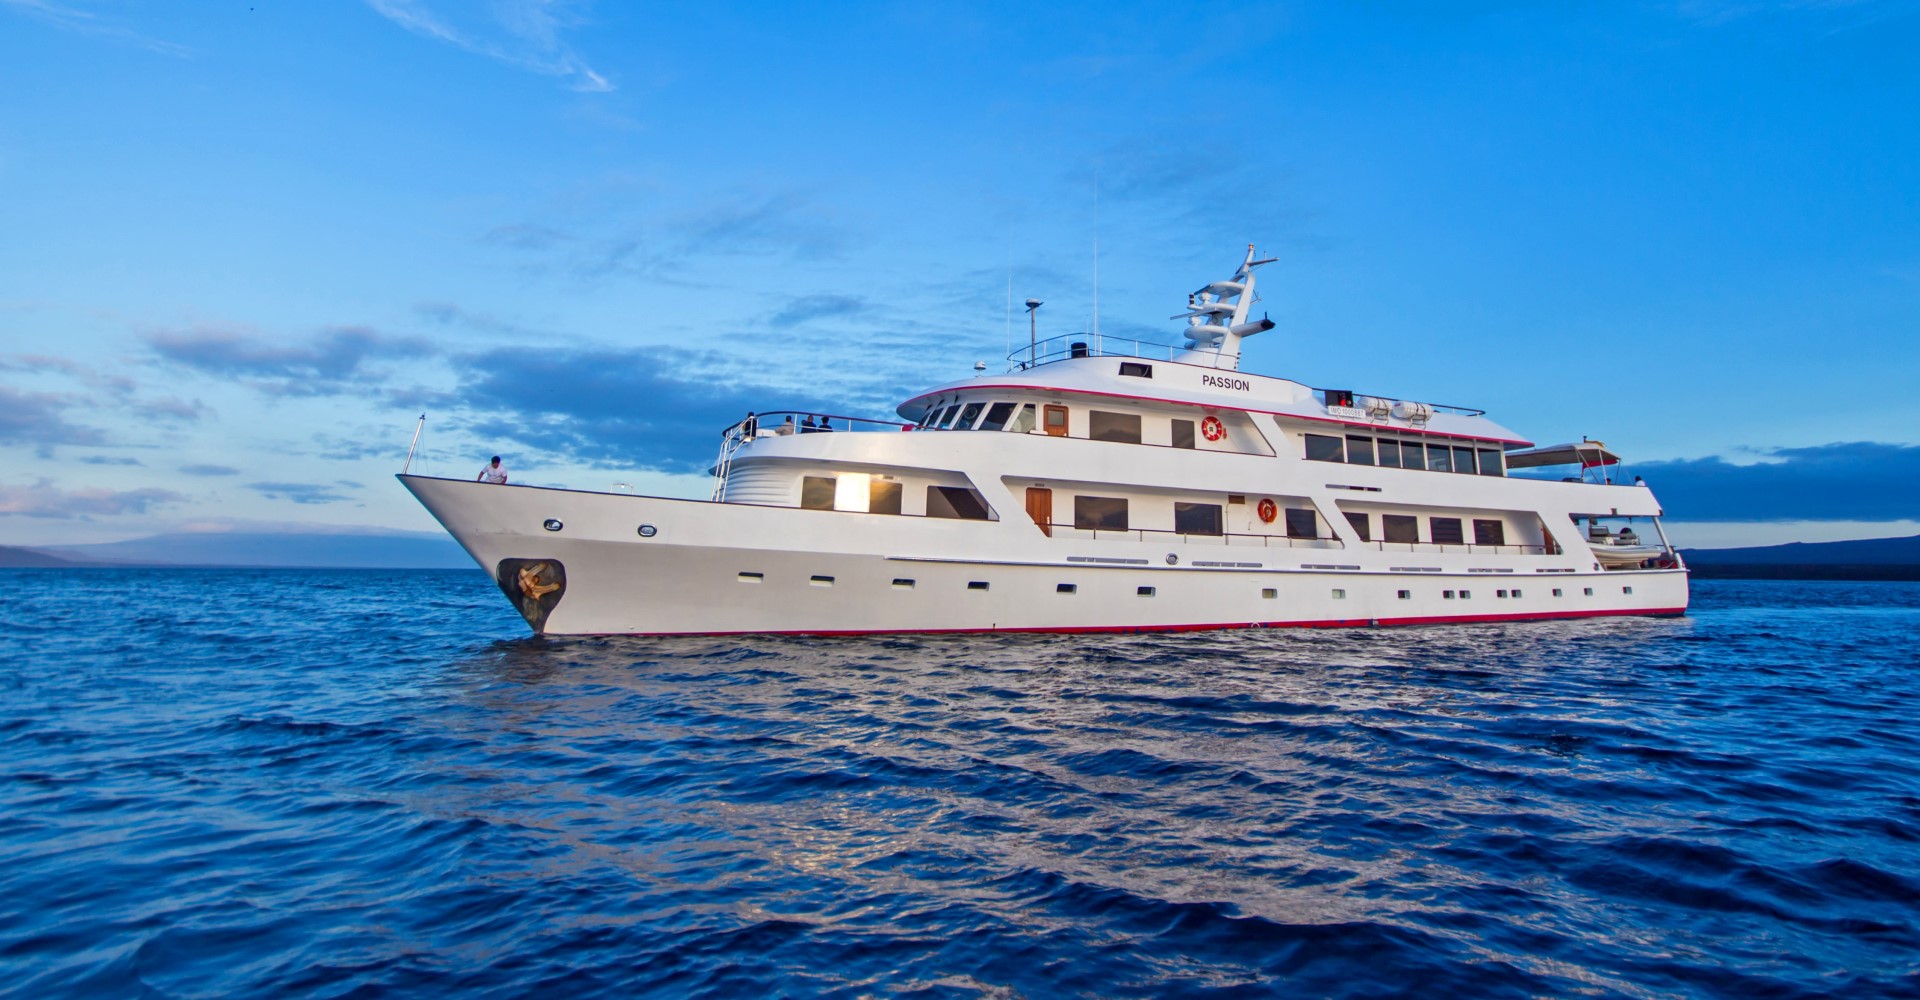 Yacht Passion Cruising in Galapagos